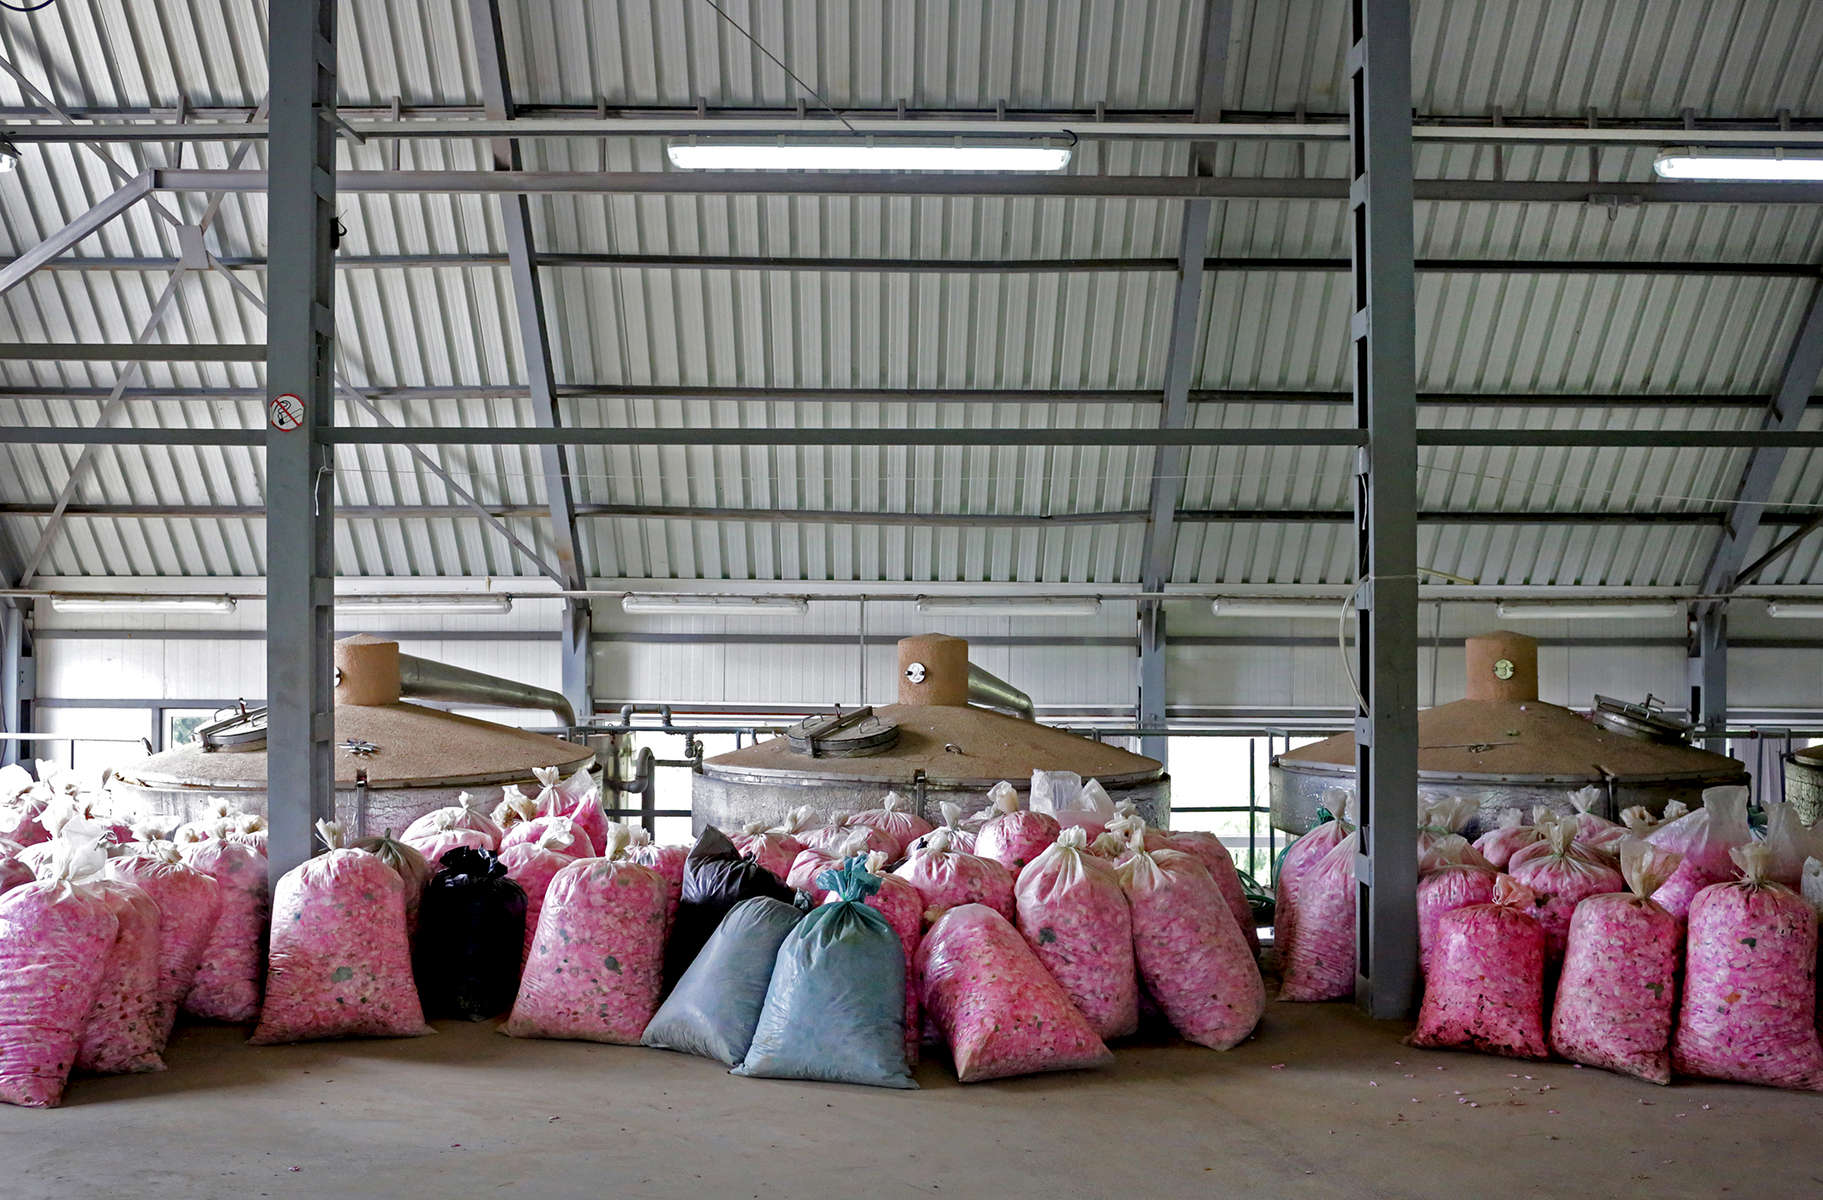 Bags of roses arrive to Lema distillery in Kazanlak, Bulgaria on May 24, 2018. Each of its caldrons has a 5 ton capacity, and it takes 3 to 5 tonnes of roses to produce just 1 kg of rose oil. Lema, a family-owned rose plantation and production facility of over 40 years, produces mainly rose oil, rose water, lavender oil, and souvenirs. Photo by: Yana Paskova for National Geographic Traveler